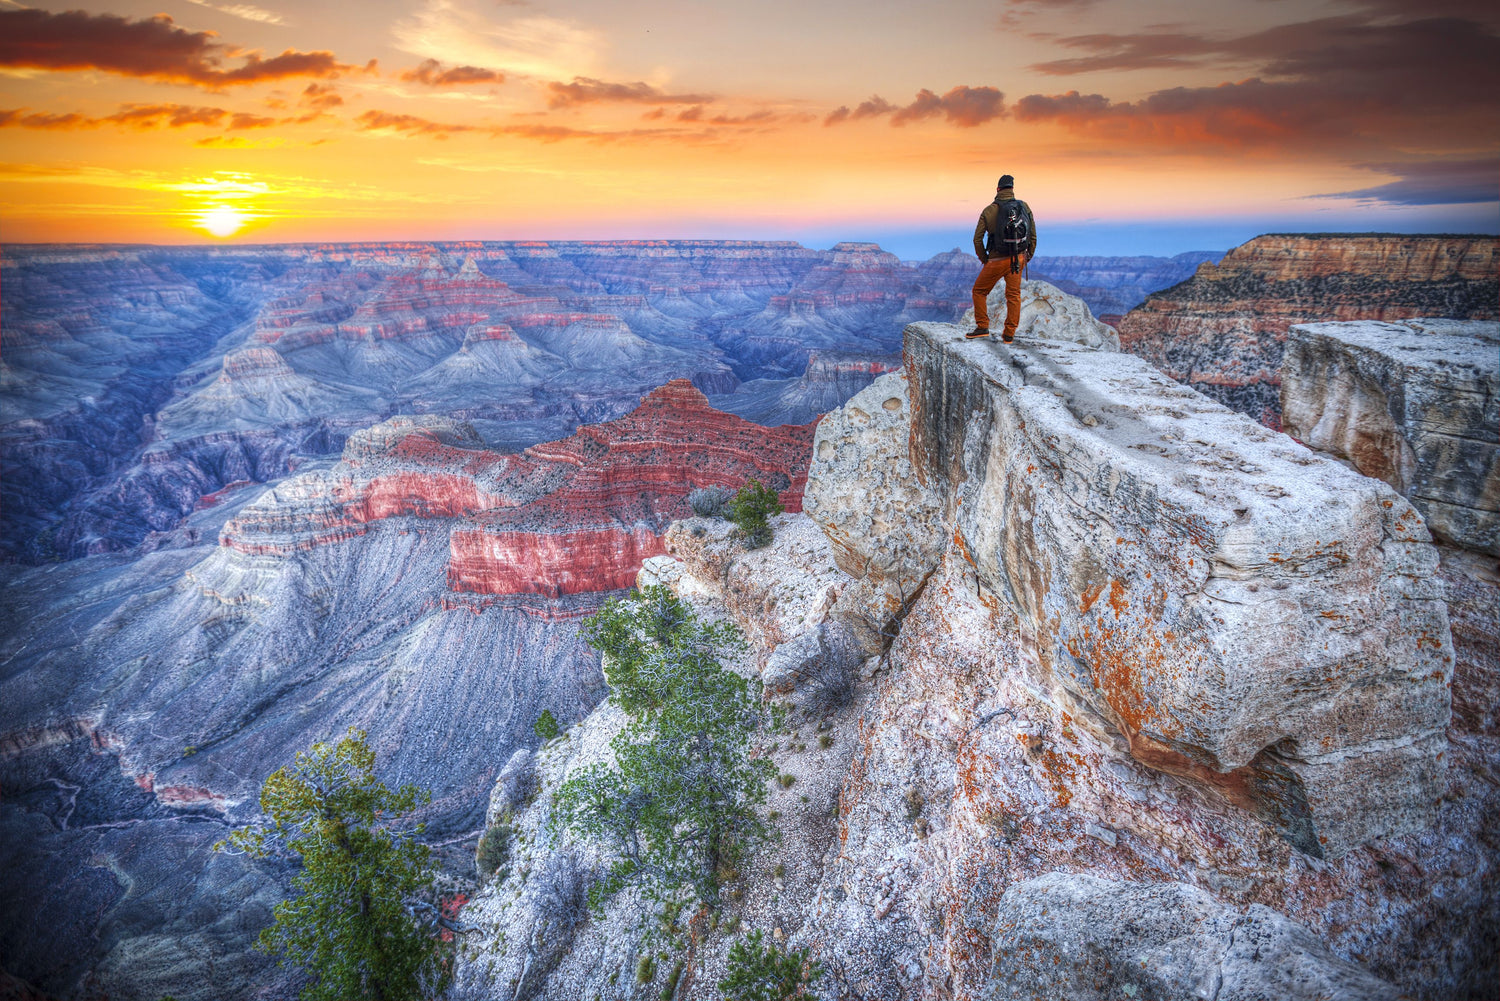 Empowering access to the depths of the Grand Canyon